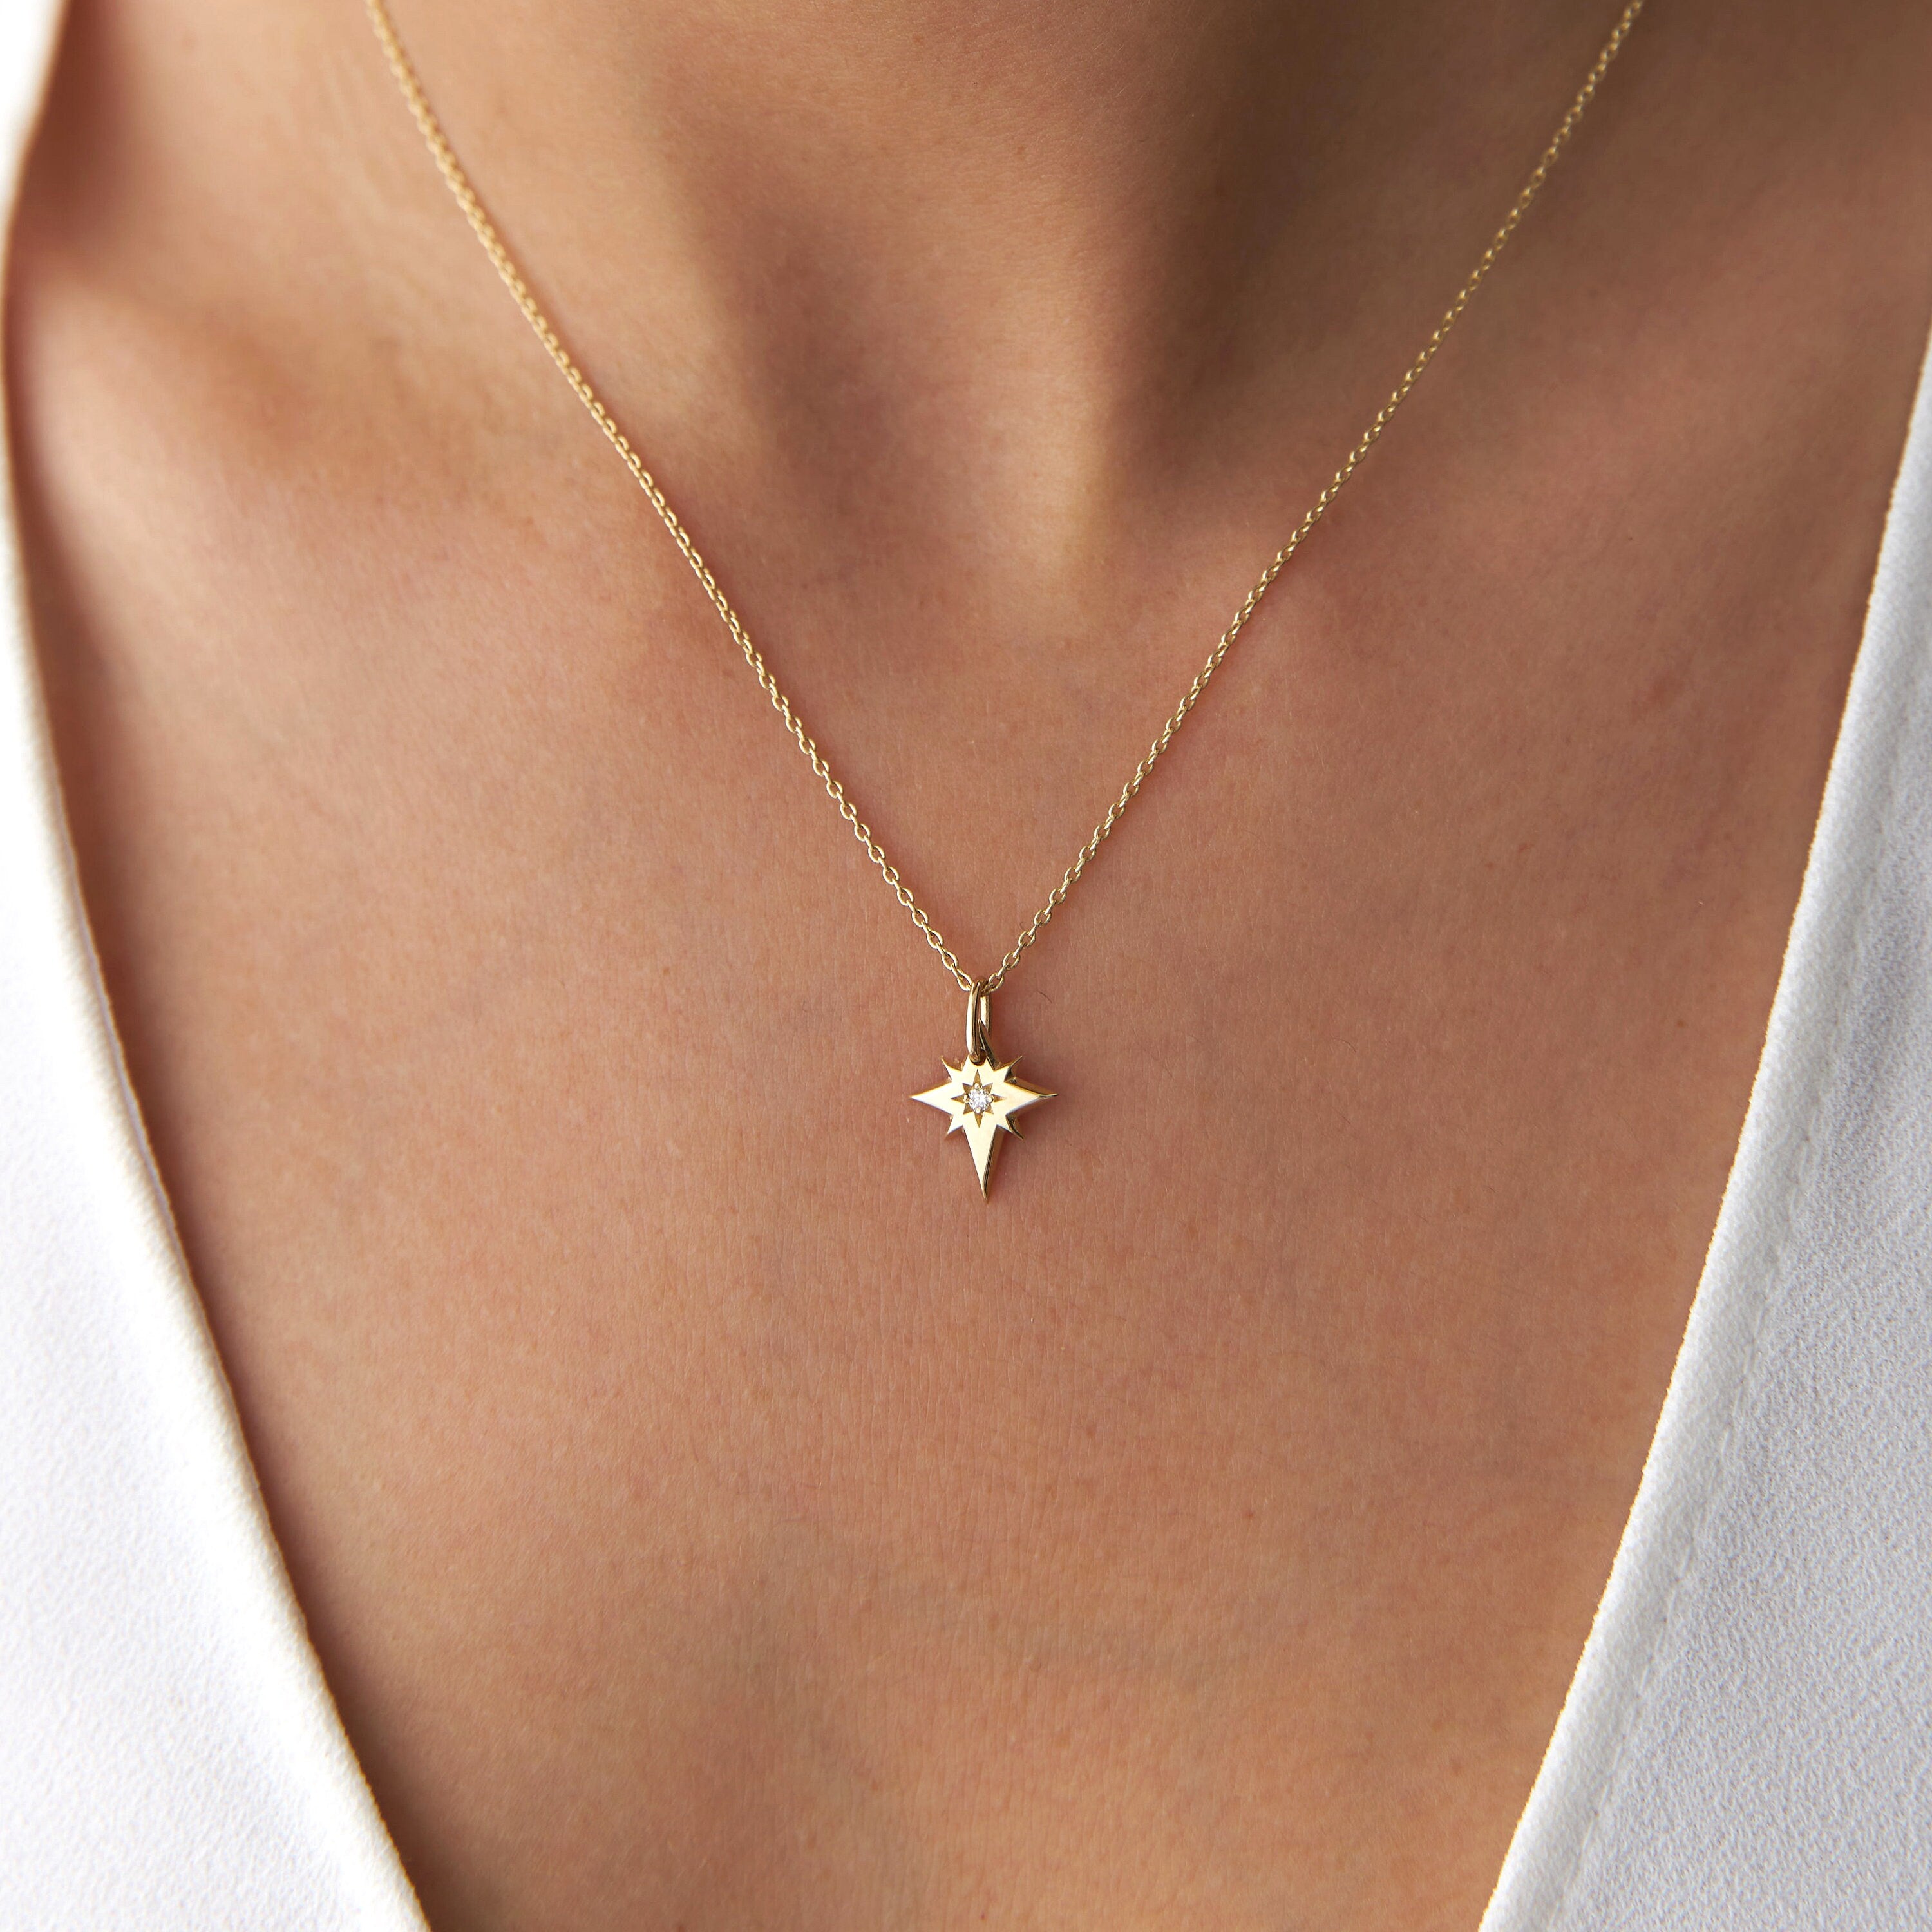 Tiny Diamond North Star Pendant Necklace in 14K Gold